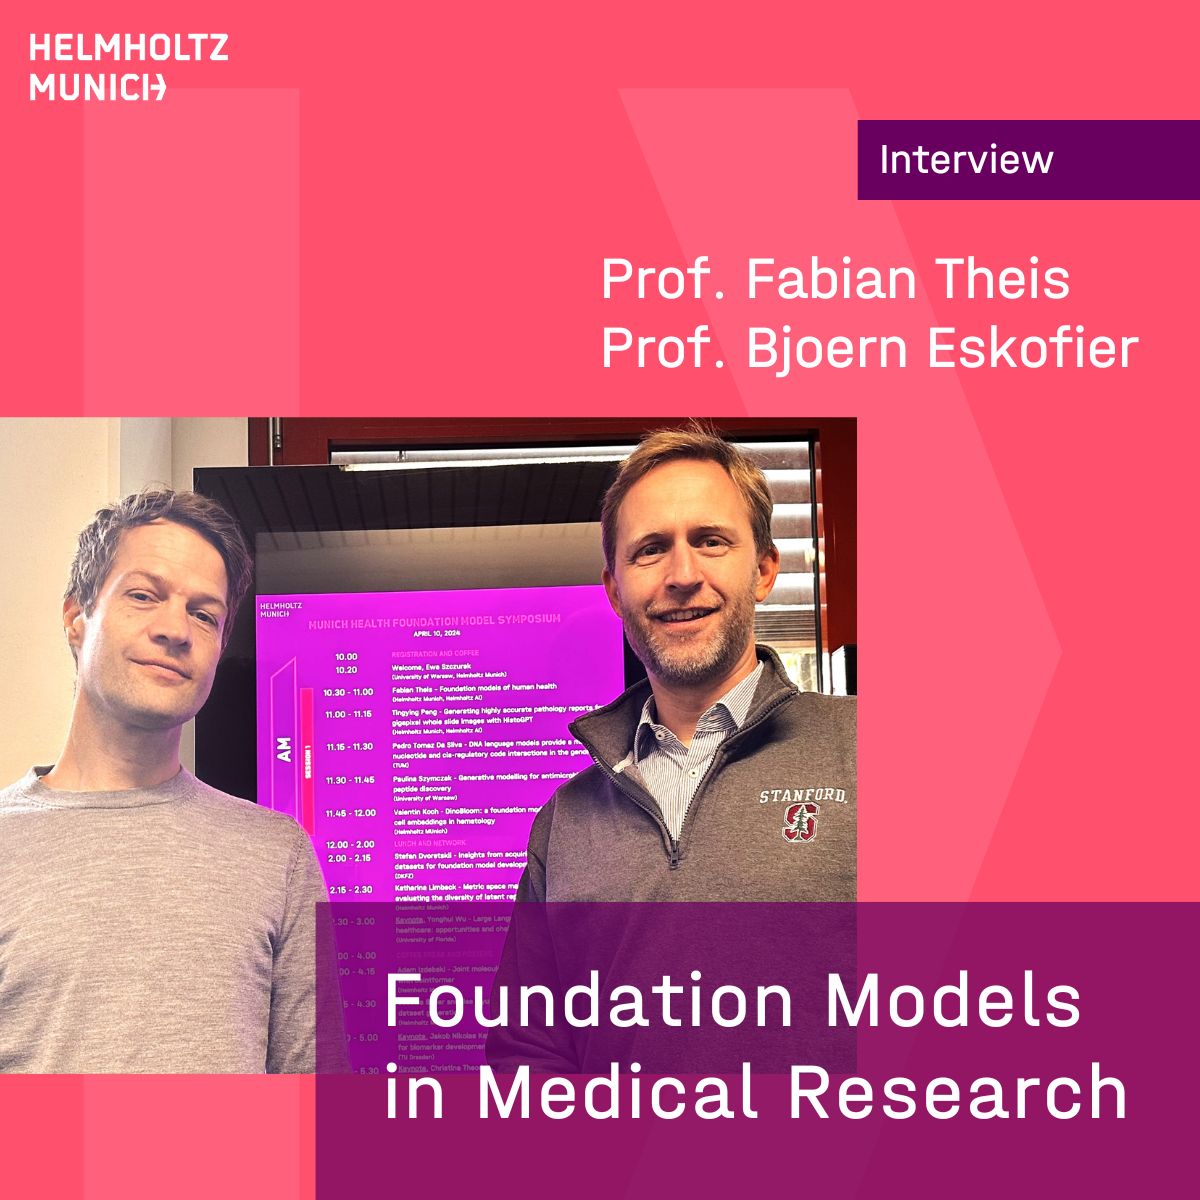 Today the 1st Munich #Health Foundation Model Symposium takes place. 👉Check out the #interview with #HelmholtzMunich experts @fabian_theis & @BjoernEskofier about #Foundation #Models in Medical Research: 🎙️t1p.de/6yawm